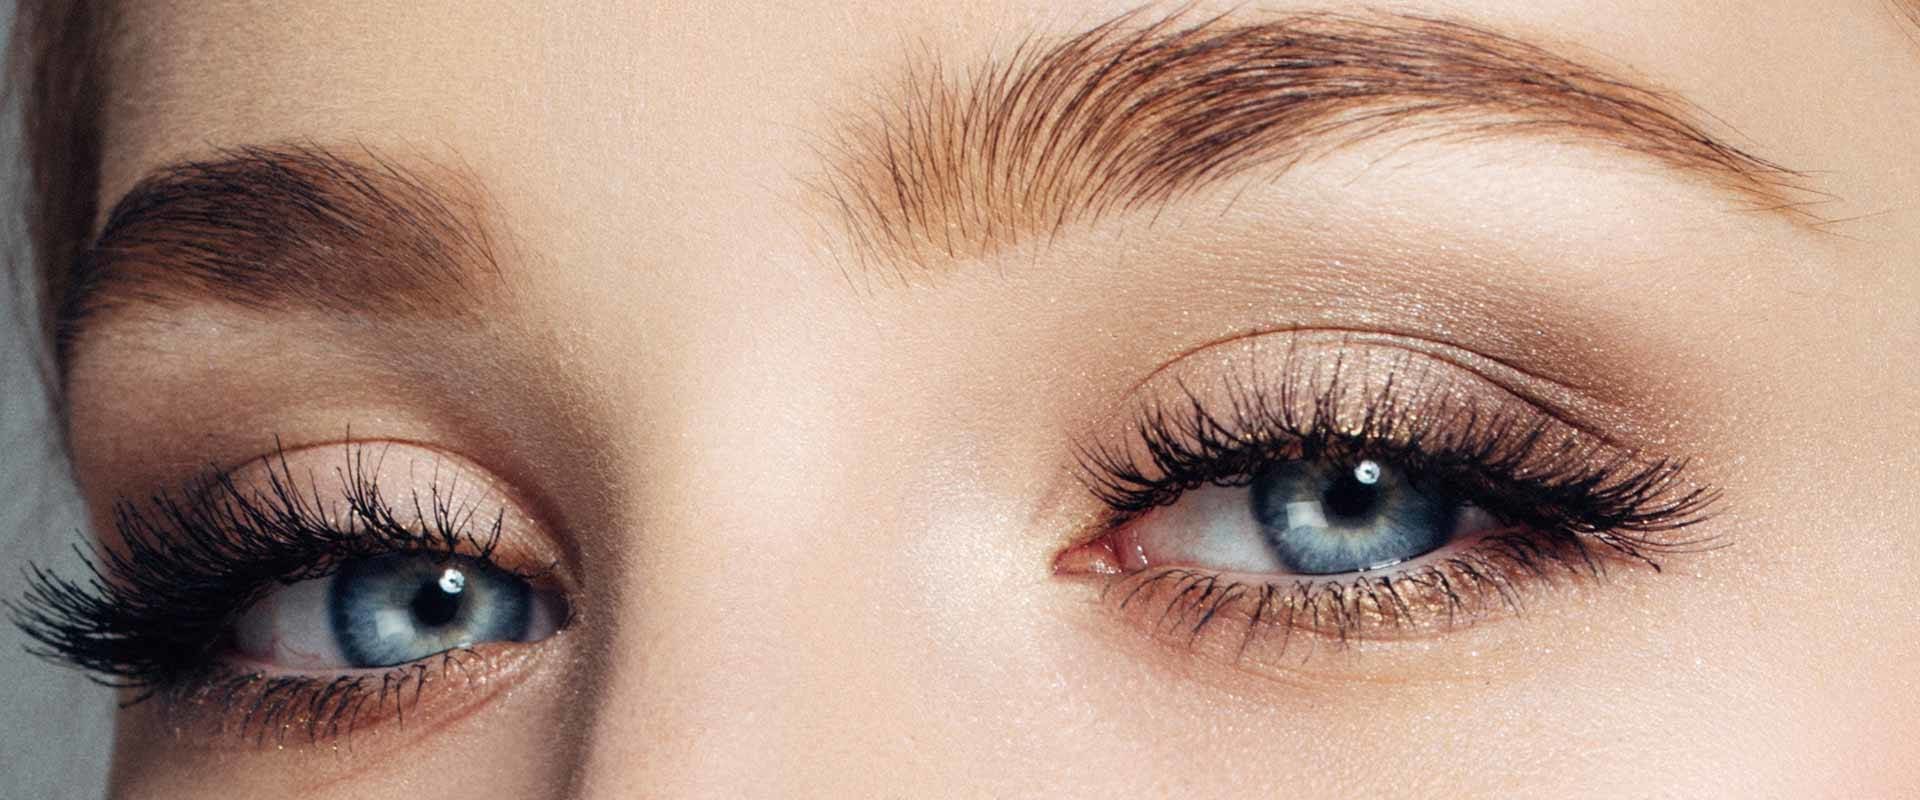 What lashes are used for wispy?